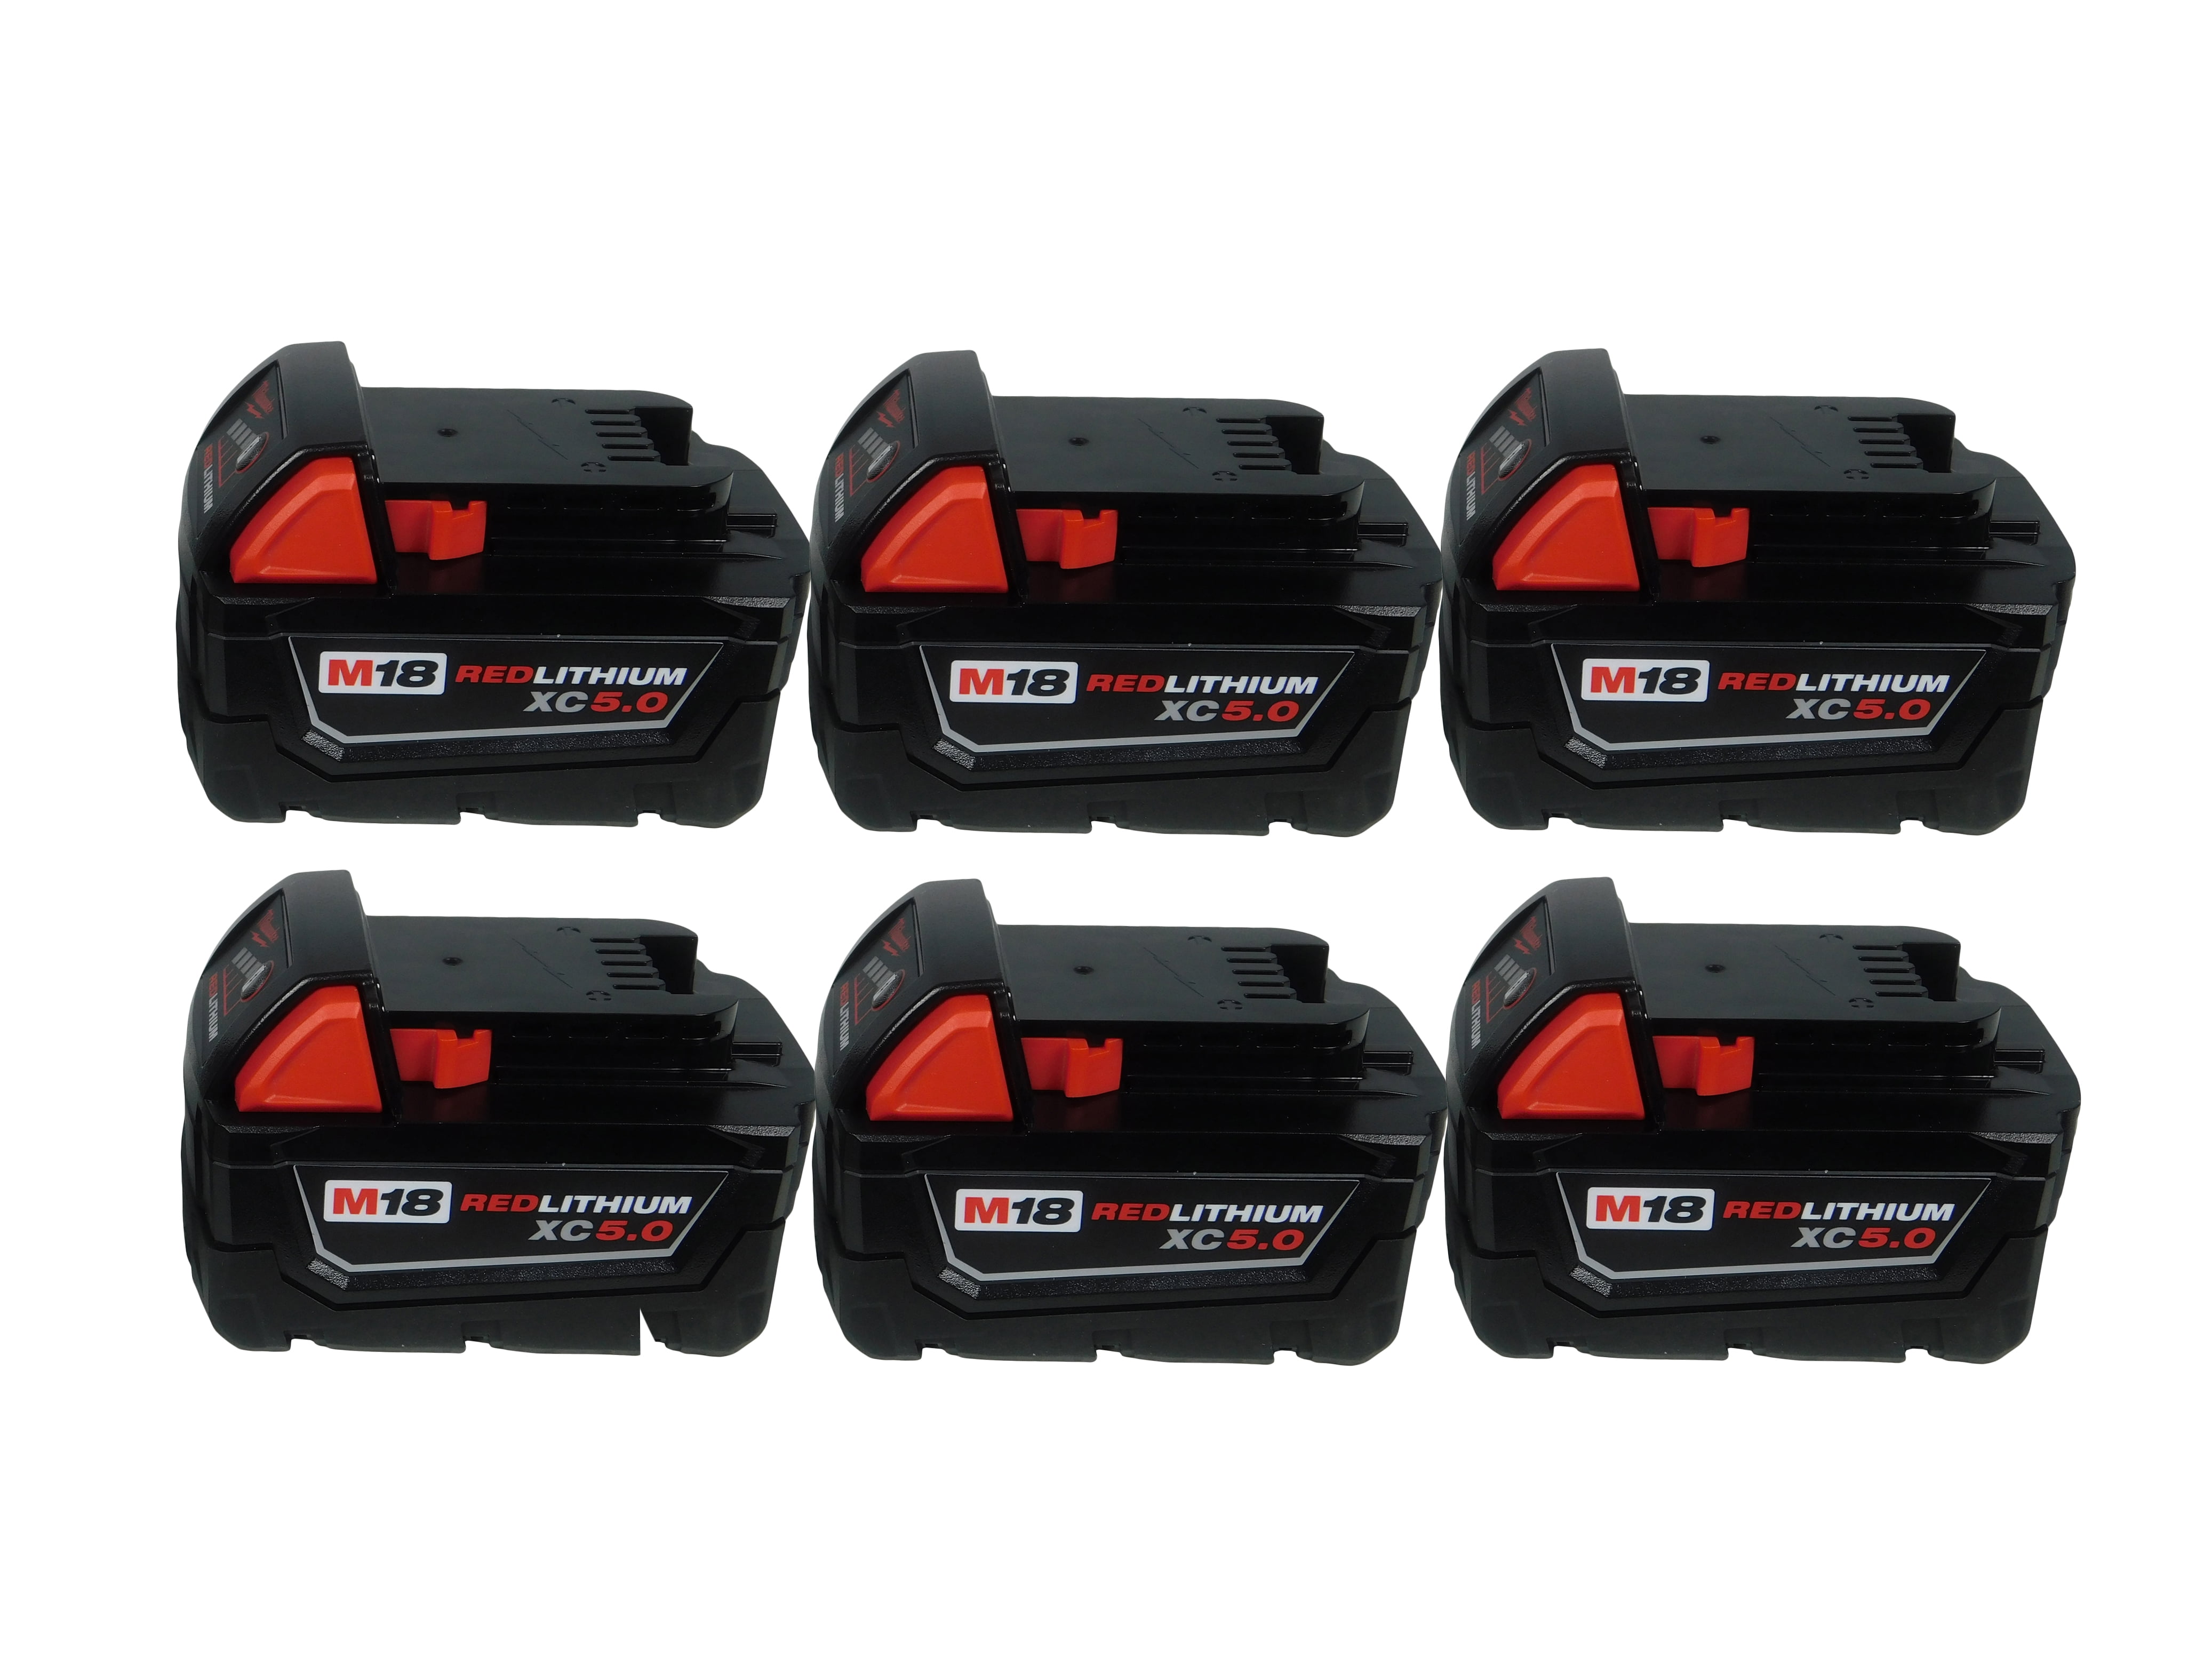 Details about   2X For Milwaukee M18 Lithium XC 5.0Ah 18V Extended Battery 48-11-1860 Charger 